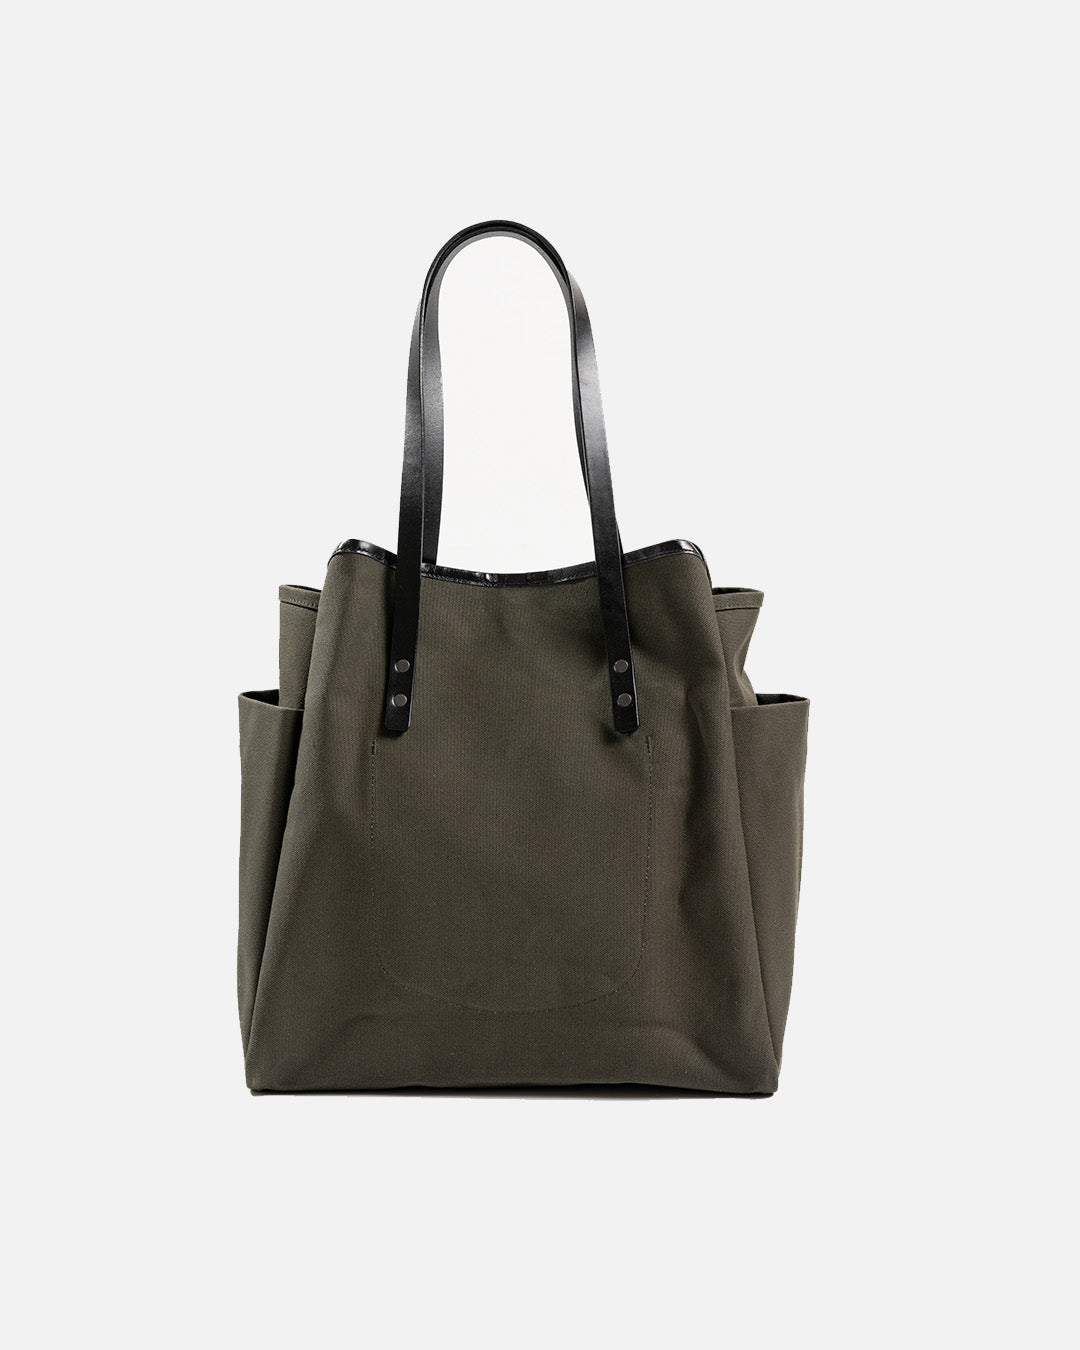 Southern Field Industries SHOPPER Tote - Olive / Black – The 